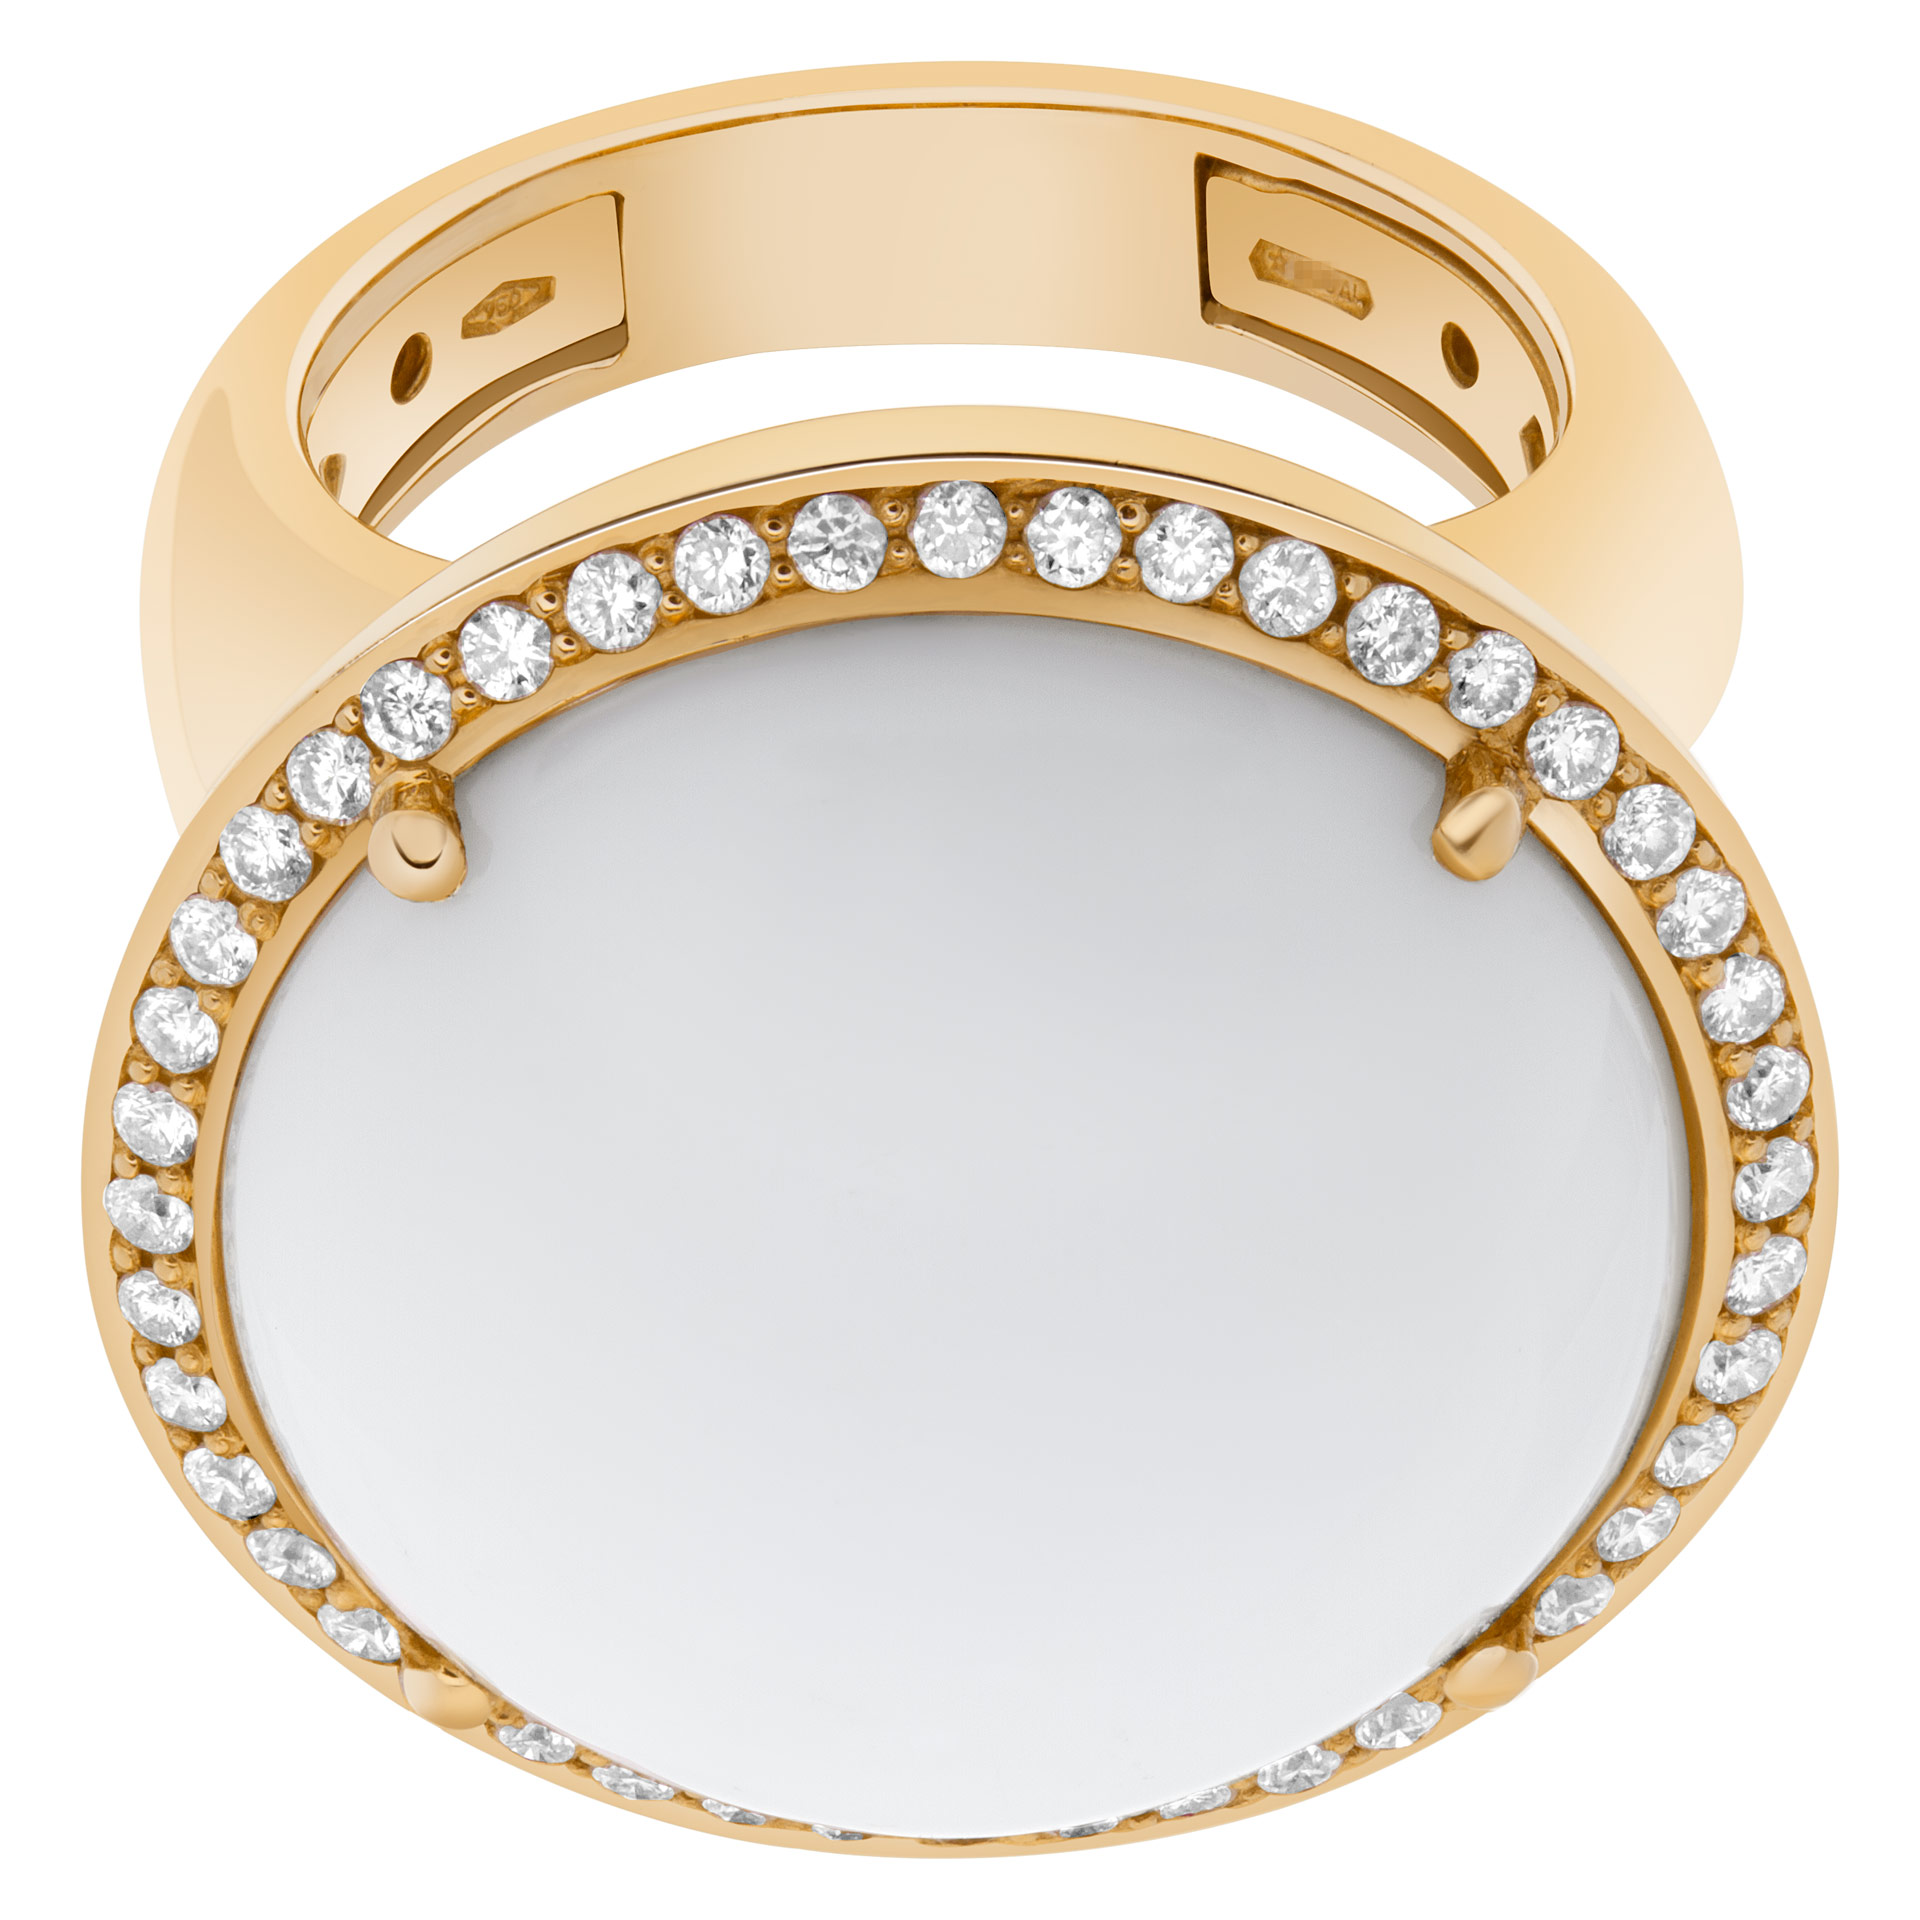 Superbly crafted large white coral cabochon ring with diamonds set in 18k rose gold. image 1